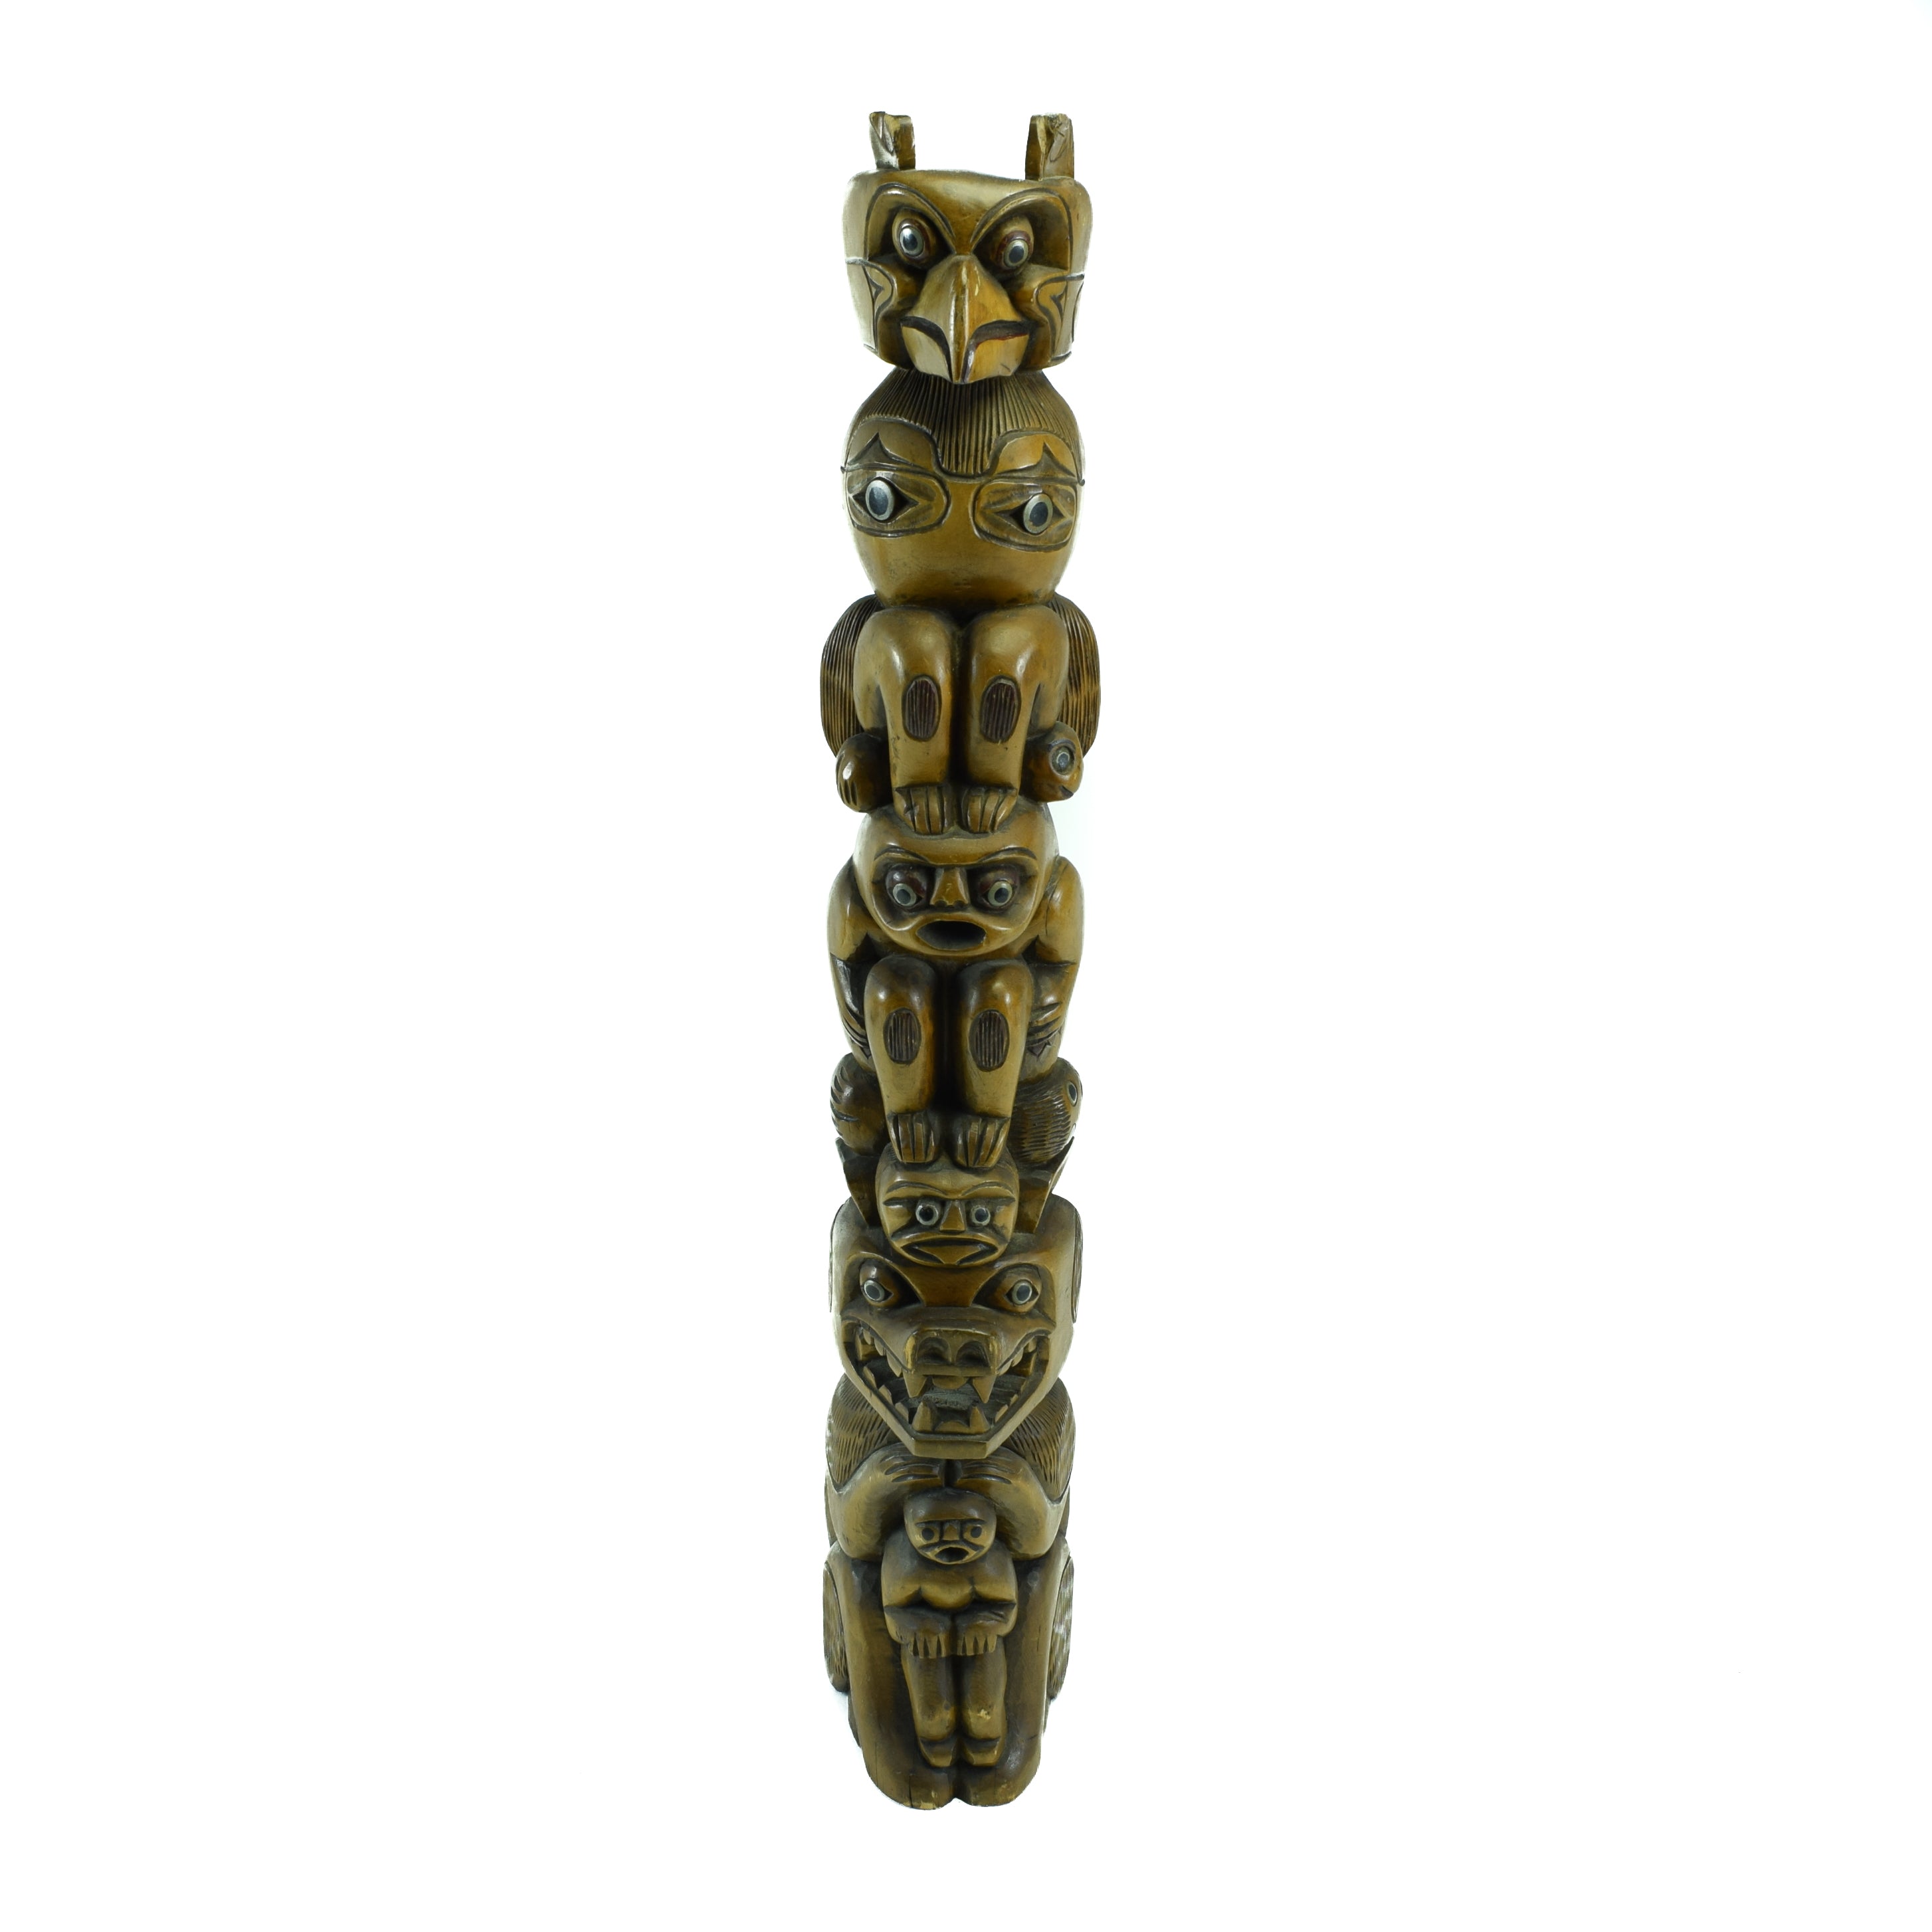 Mowachaht/Nuu-chah-nulth Model Totem by Jimmy John, Native, Carving, Totem Pole